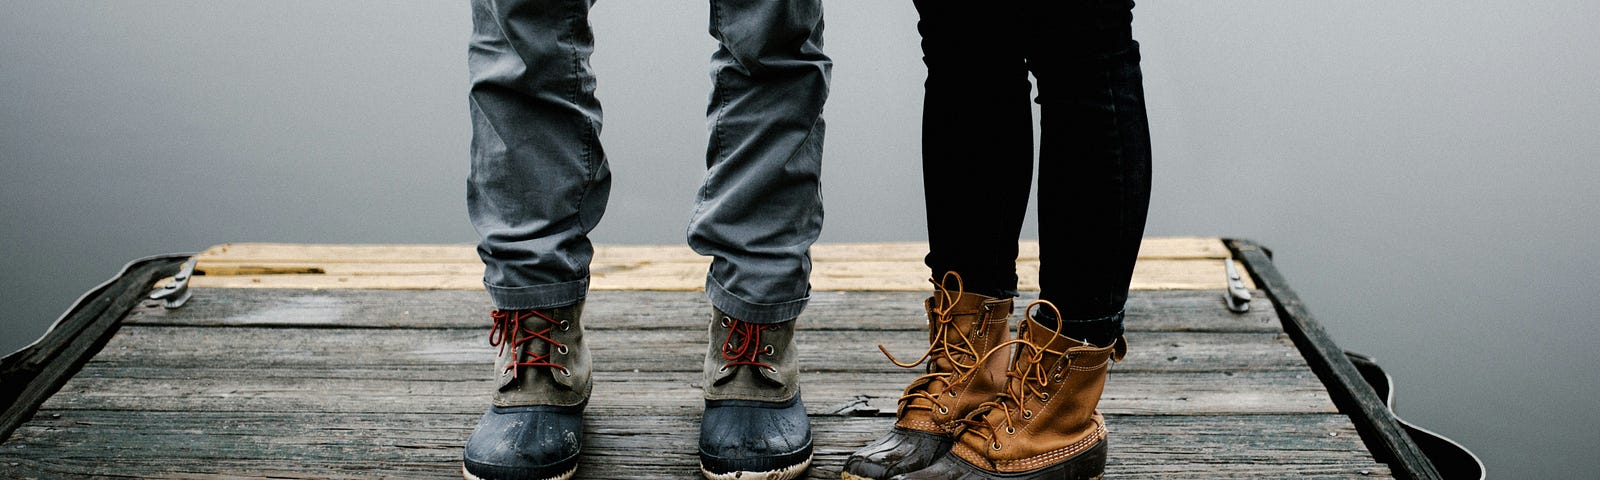 A couple is pictured from the waist down standing on a dock